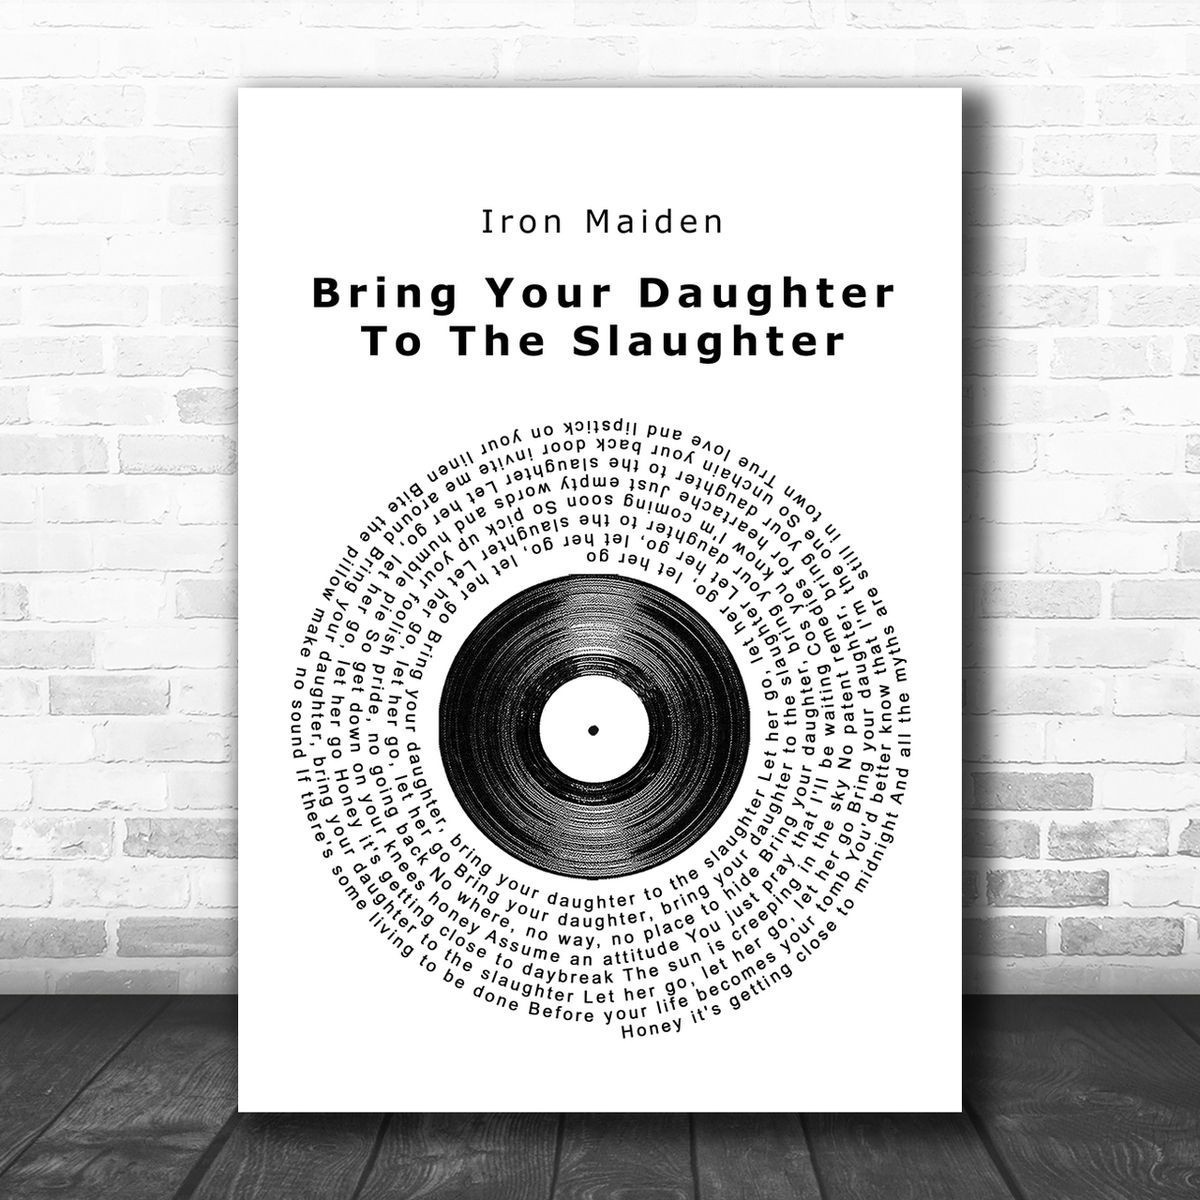 Iron Maiden Bring Your Daughter To The Slaughter Vinyl Record Song Lyric Music Wall Art Print